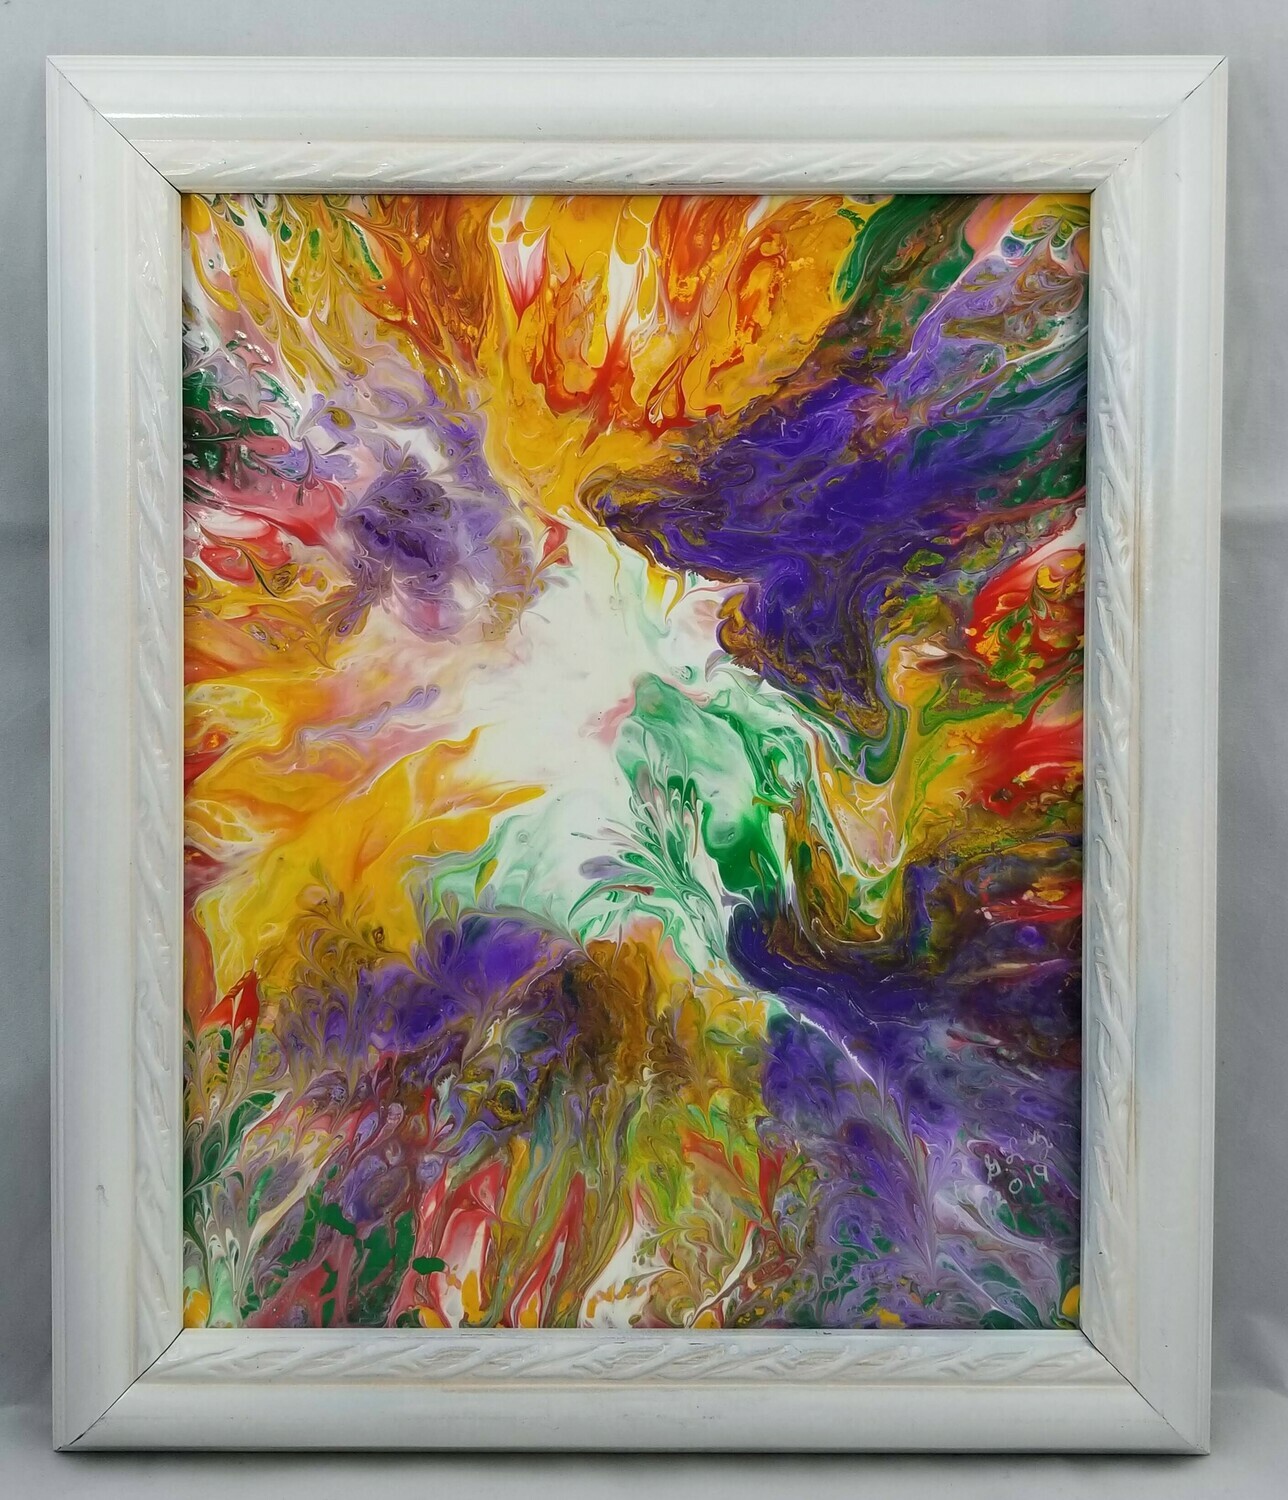 11X13 FRAMED ABSTRACT ON RECYCLED  GLASS